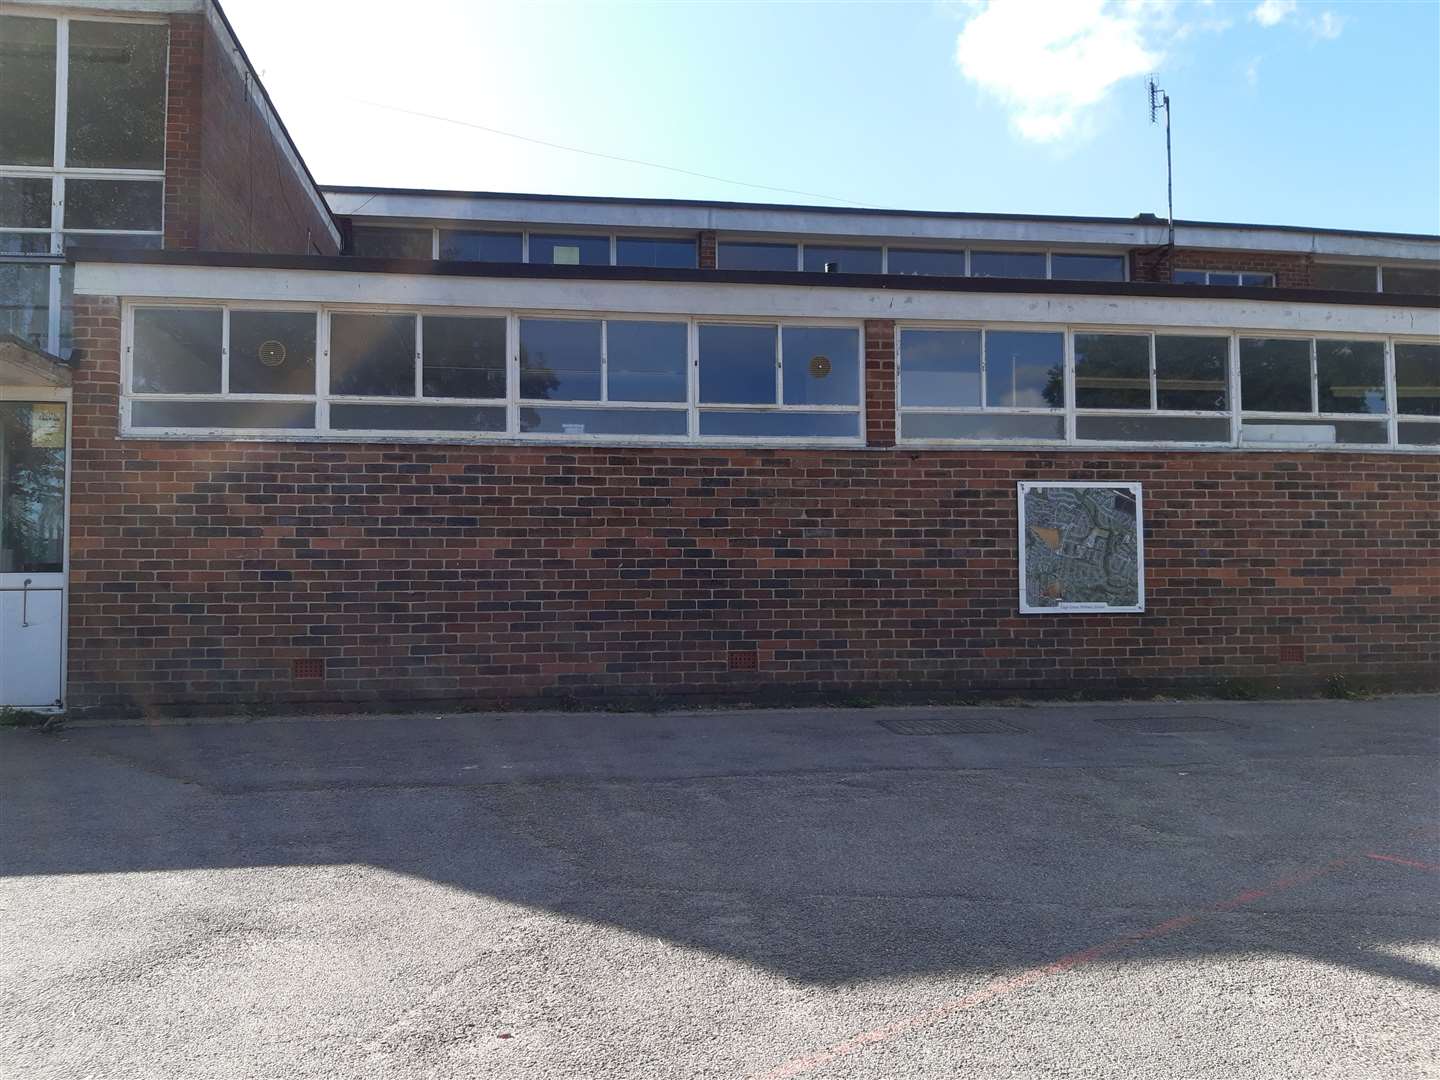 Cage Green Primary School